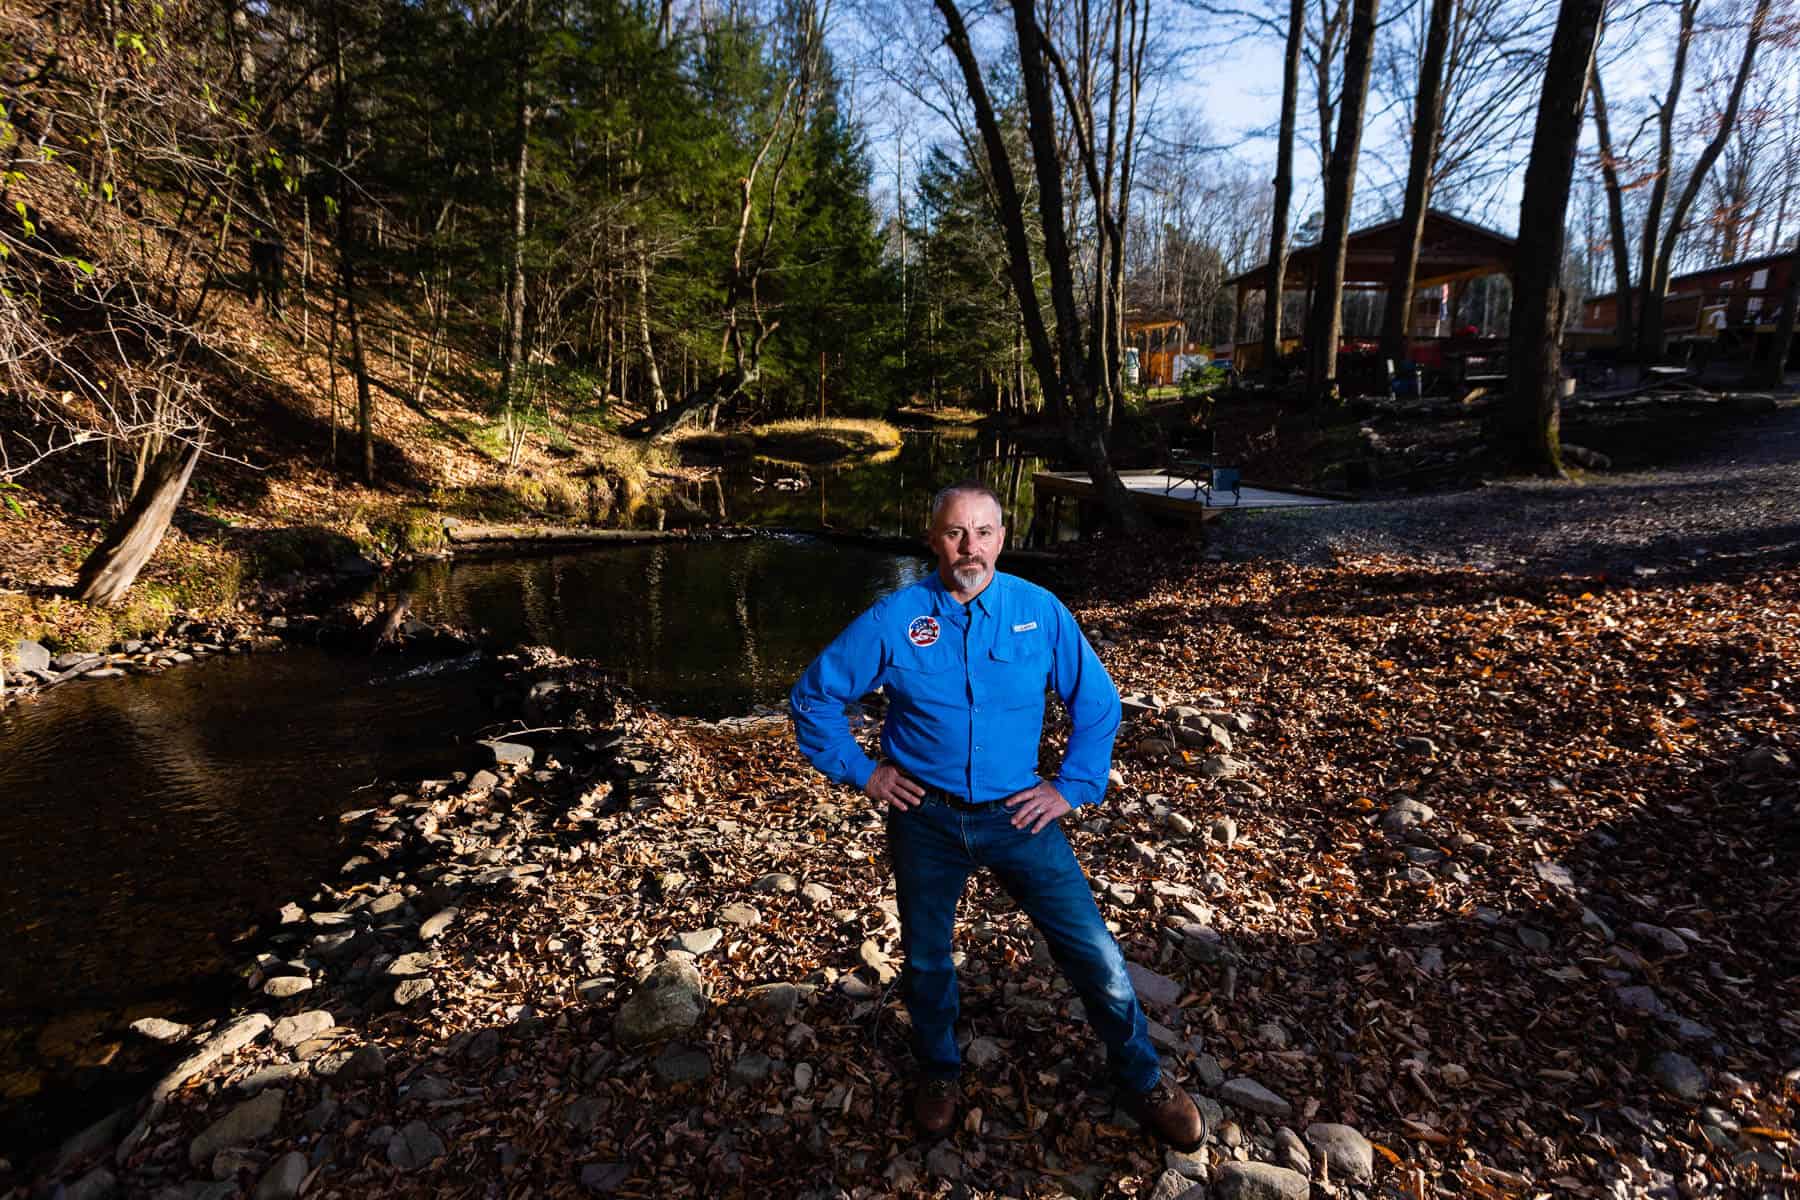 A military veteran’s new mission is to restore a stream and help people heal